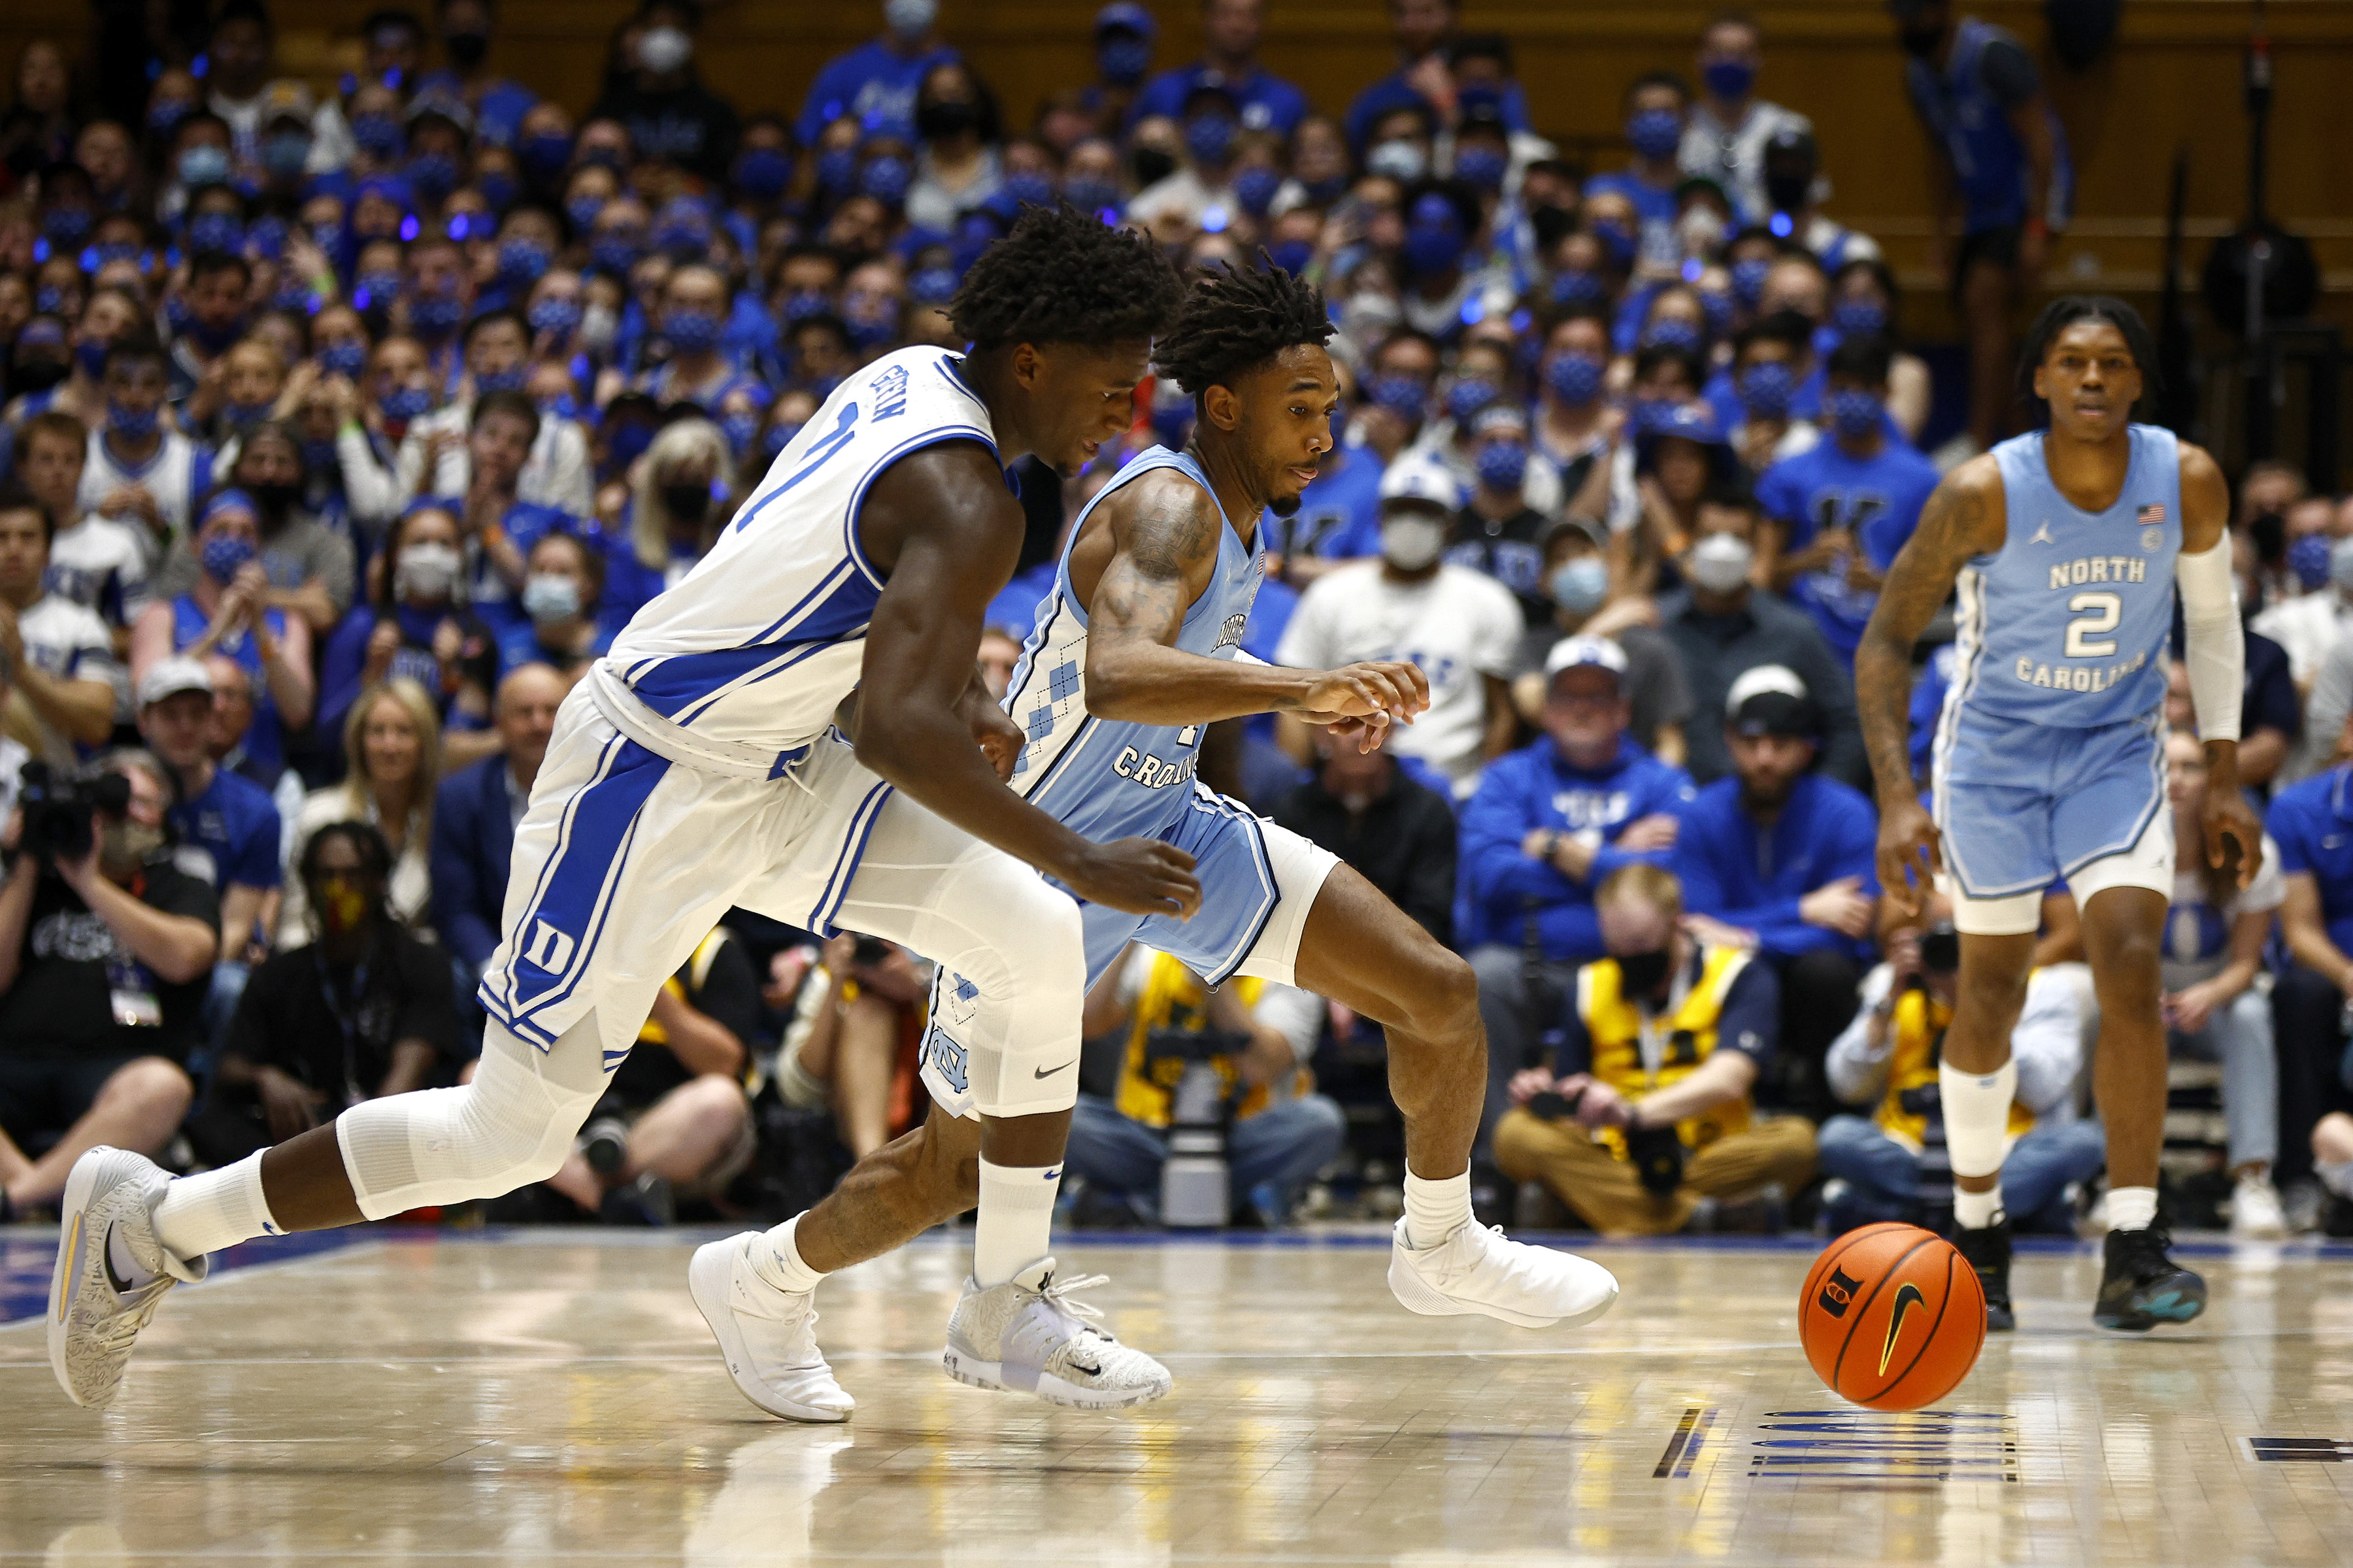 Duke's AJ Griffin and North Carolina forward Leaky Black go after a loose ball during an NCAA men's basketball game in March